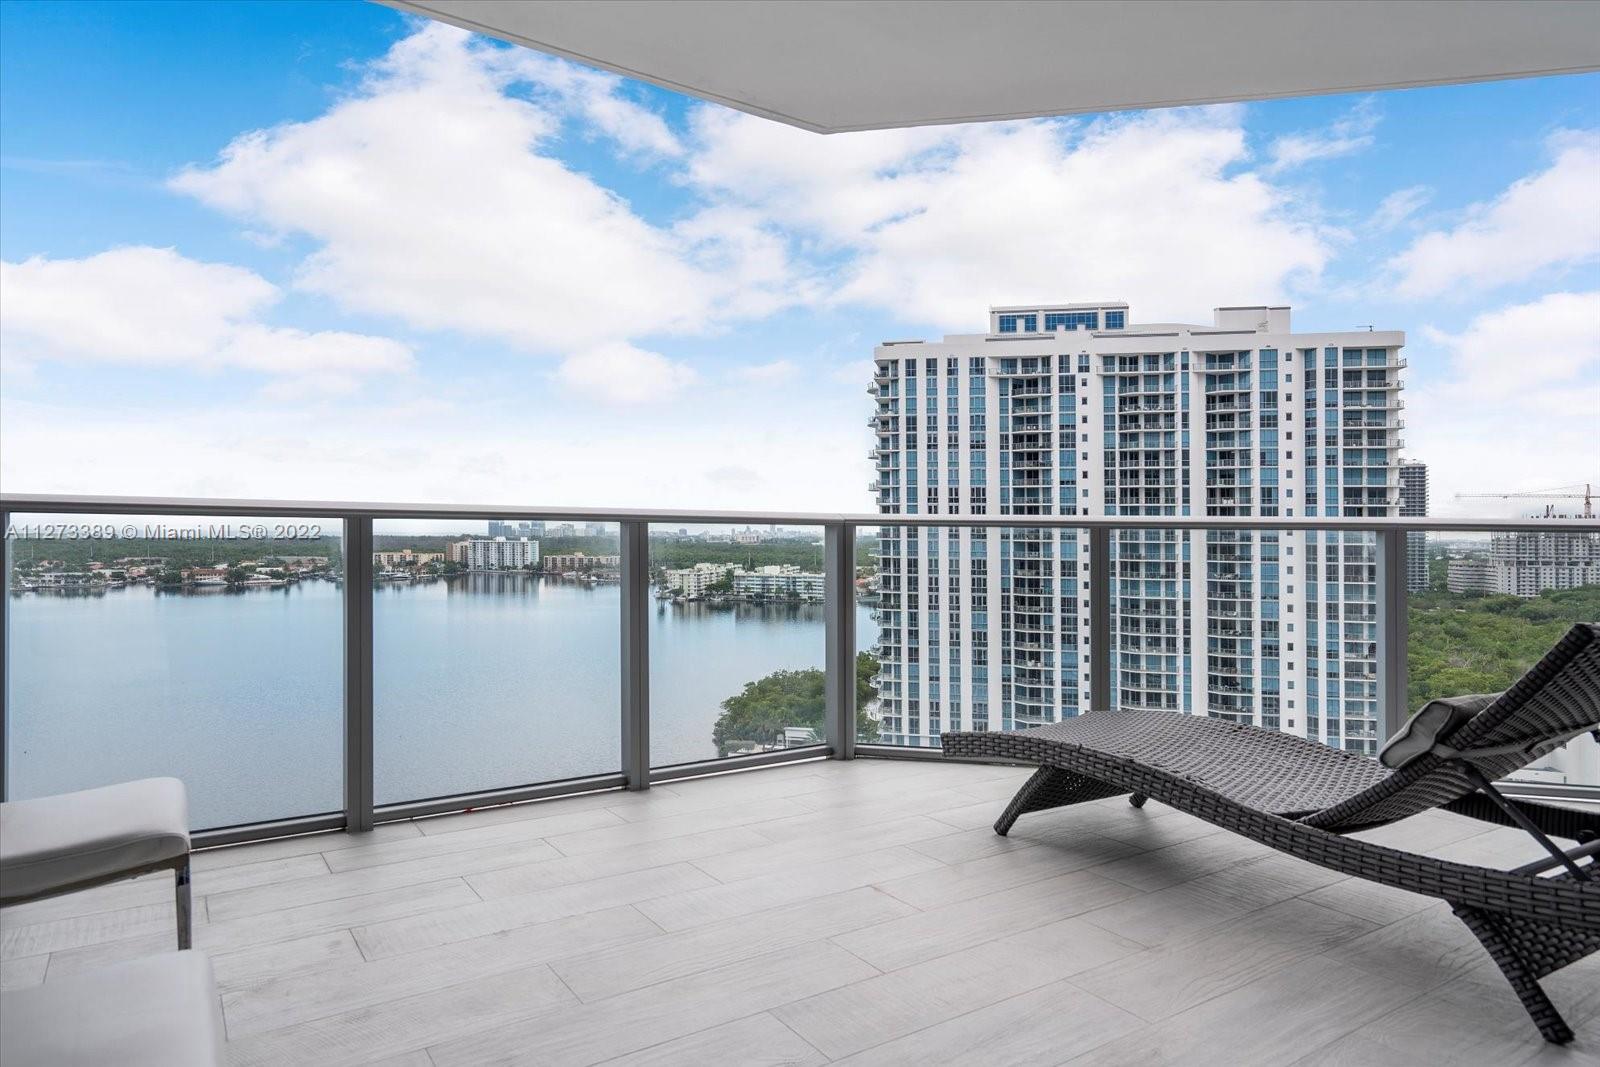 Stunning unit with South east views,Intracoastal views to take away your breath away overlooking the private Marina from every room. Spacious 1736 sf, 2beds|2 baths , large
living room and dinning area, white porcelain floors throughout, open gourmet kitchen, ZubZero and wolf appliances, custom closets, electric shades, over 300K in upgrades, brand
new furniture. Marina Palms offers 5 stars amenities, boat club, water sports and complementary exercise classes and much more